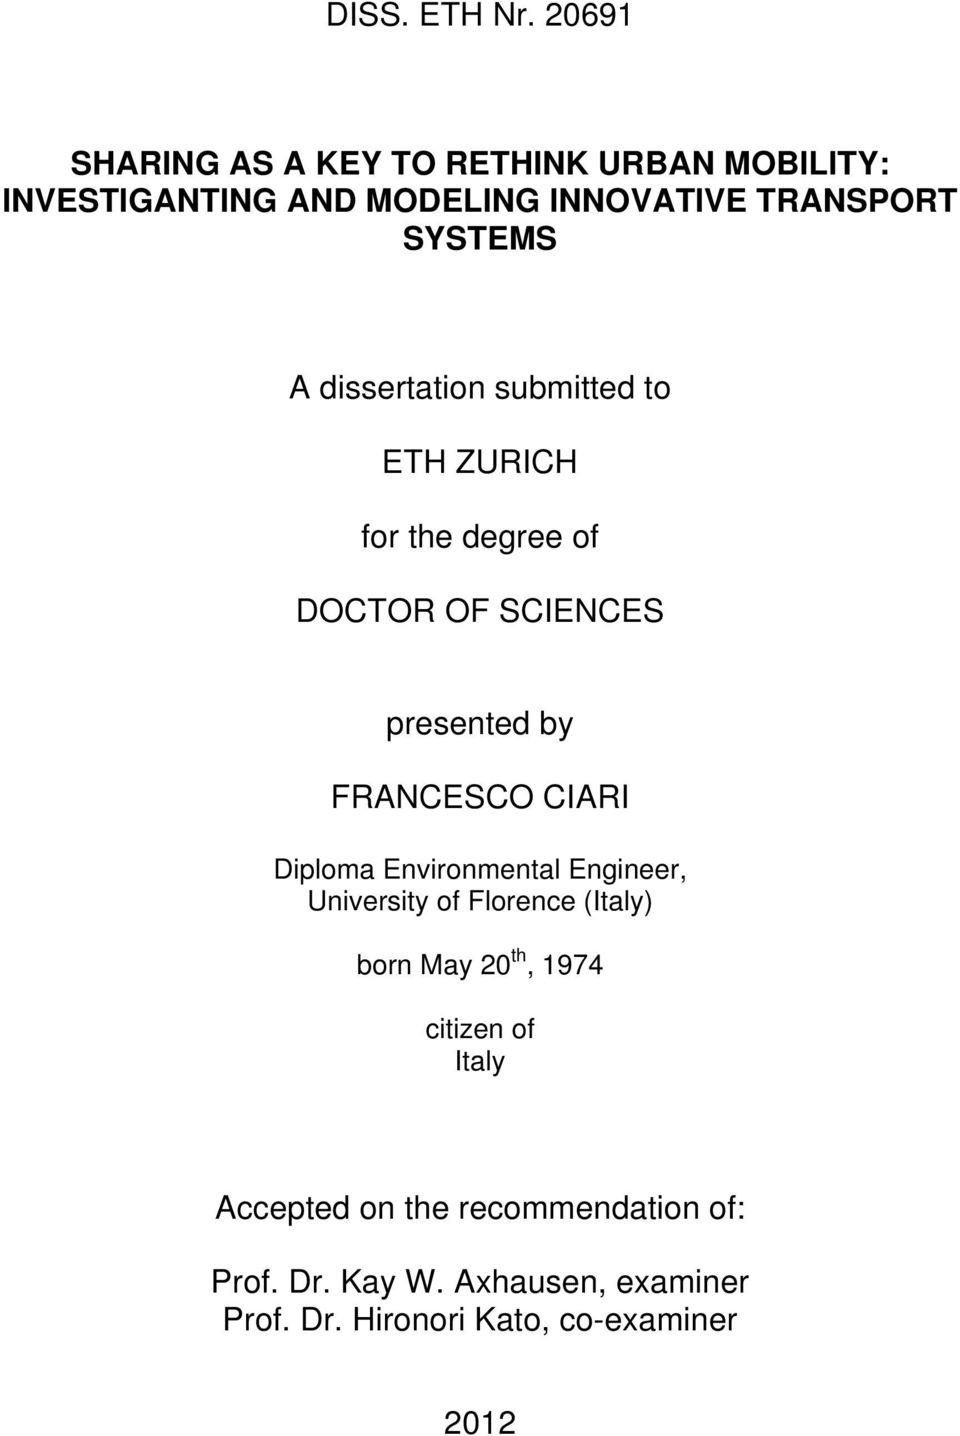 dissertation submitted to ETH ZURICH for the degree of DOCTOR OF SCIENCES presented by FRANCESCO CIARI